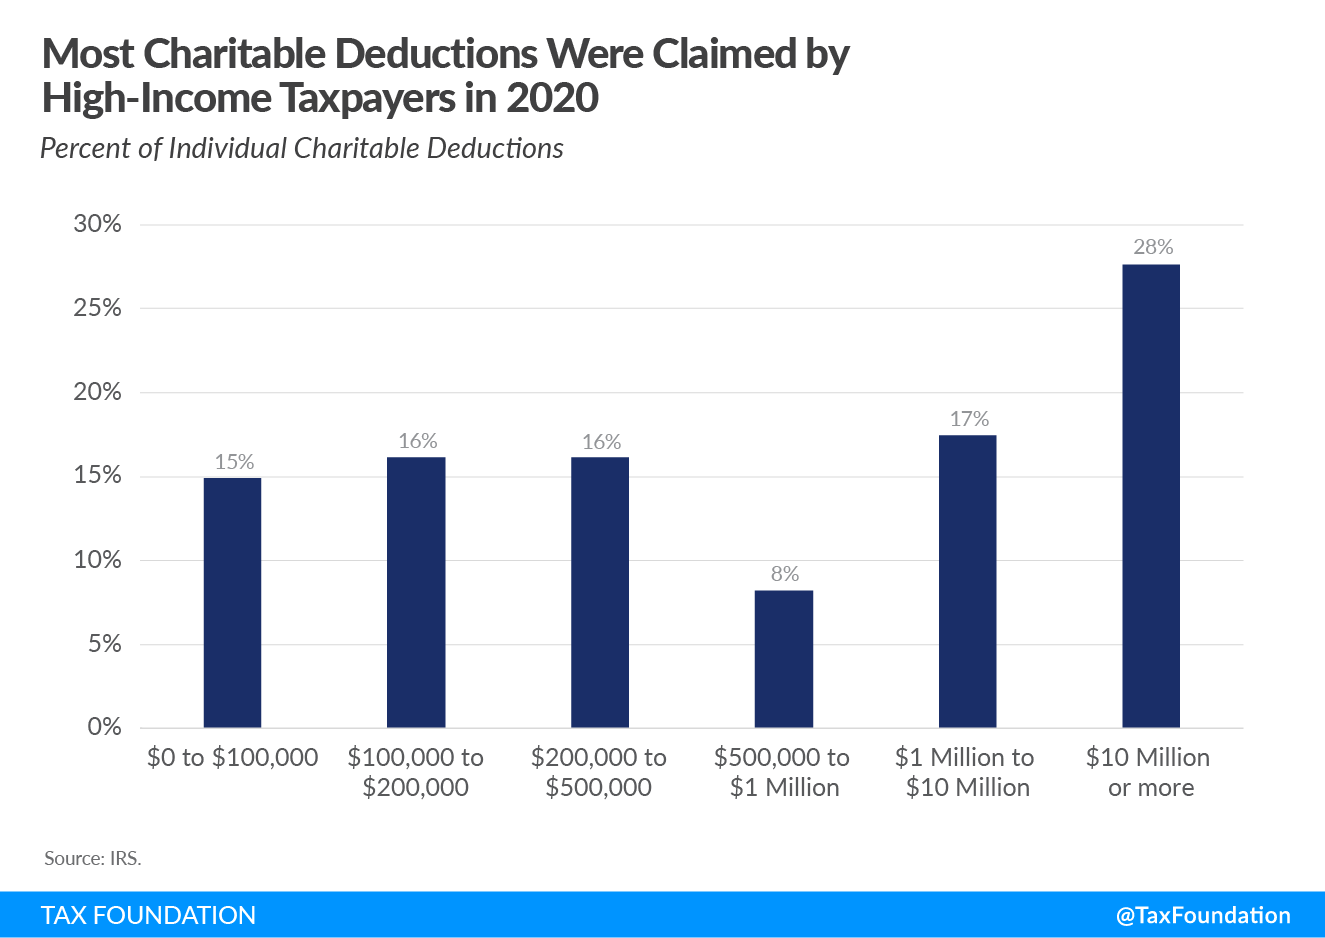 Most Charitable Deductions or Charitable Tax Deductions in 2020 Were Claimed by High-Income Taxpayers